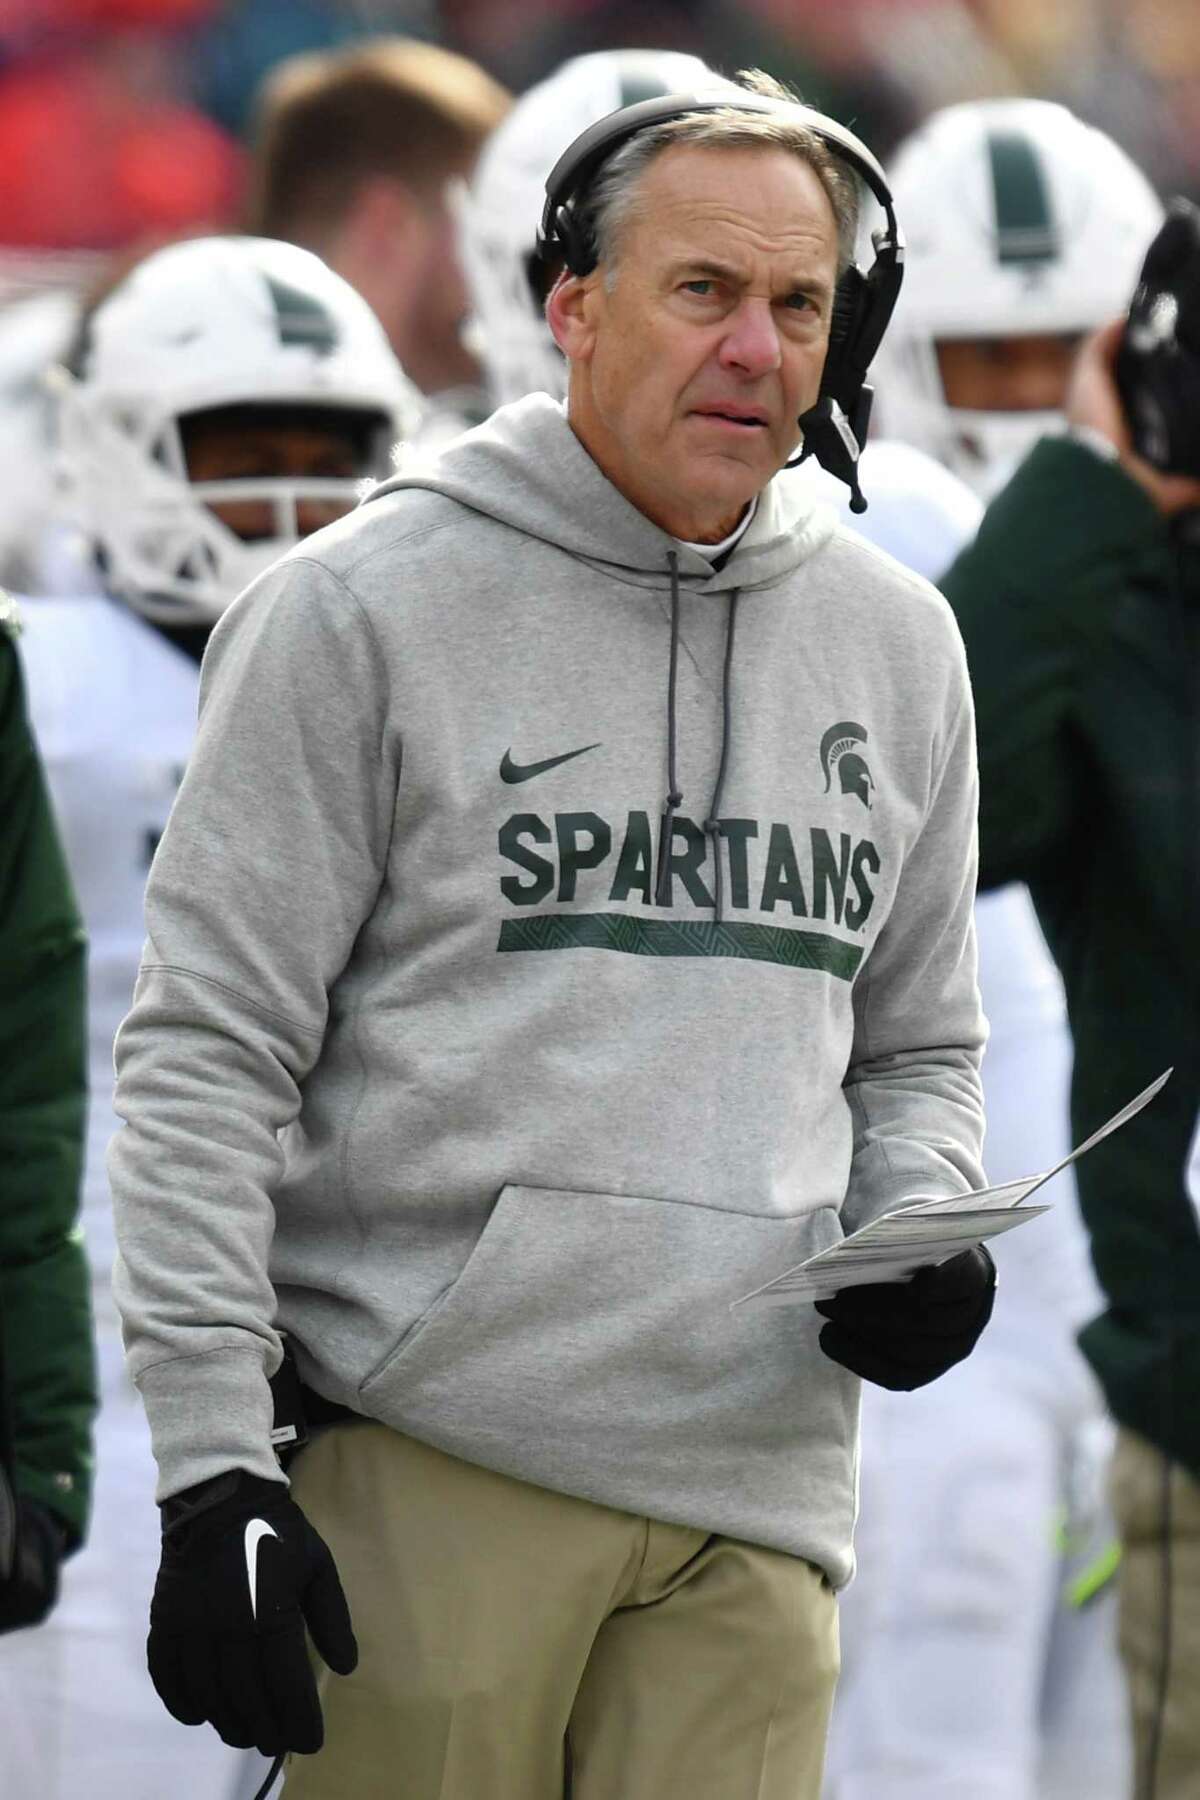 COLUMBUS, OH - NOVEMBER 11: Head Coach Mark Dantonio of the Michigan State Spartans watches his team play against the Ohio State Buckeyes in the first quarter at Ohio Stadium on November 11, 2017 in Columbus, Ohio. Ohio State defeated Michigan State 48-3. (Photo by Jamie Sabau/Getty Images) ORG XMIT: 775056968